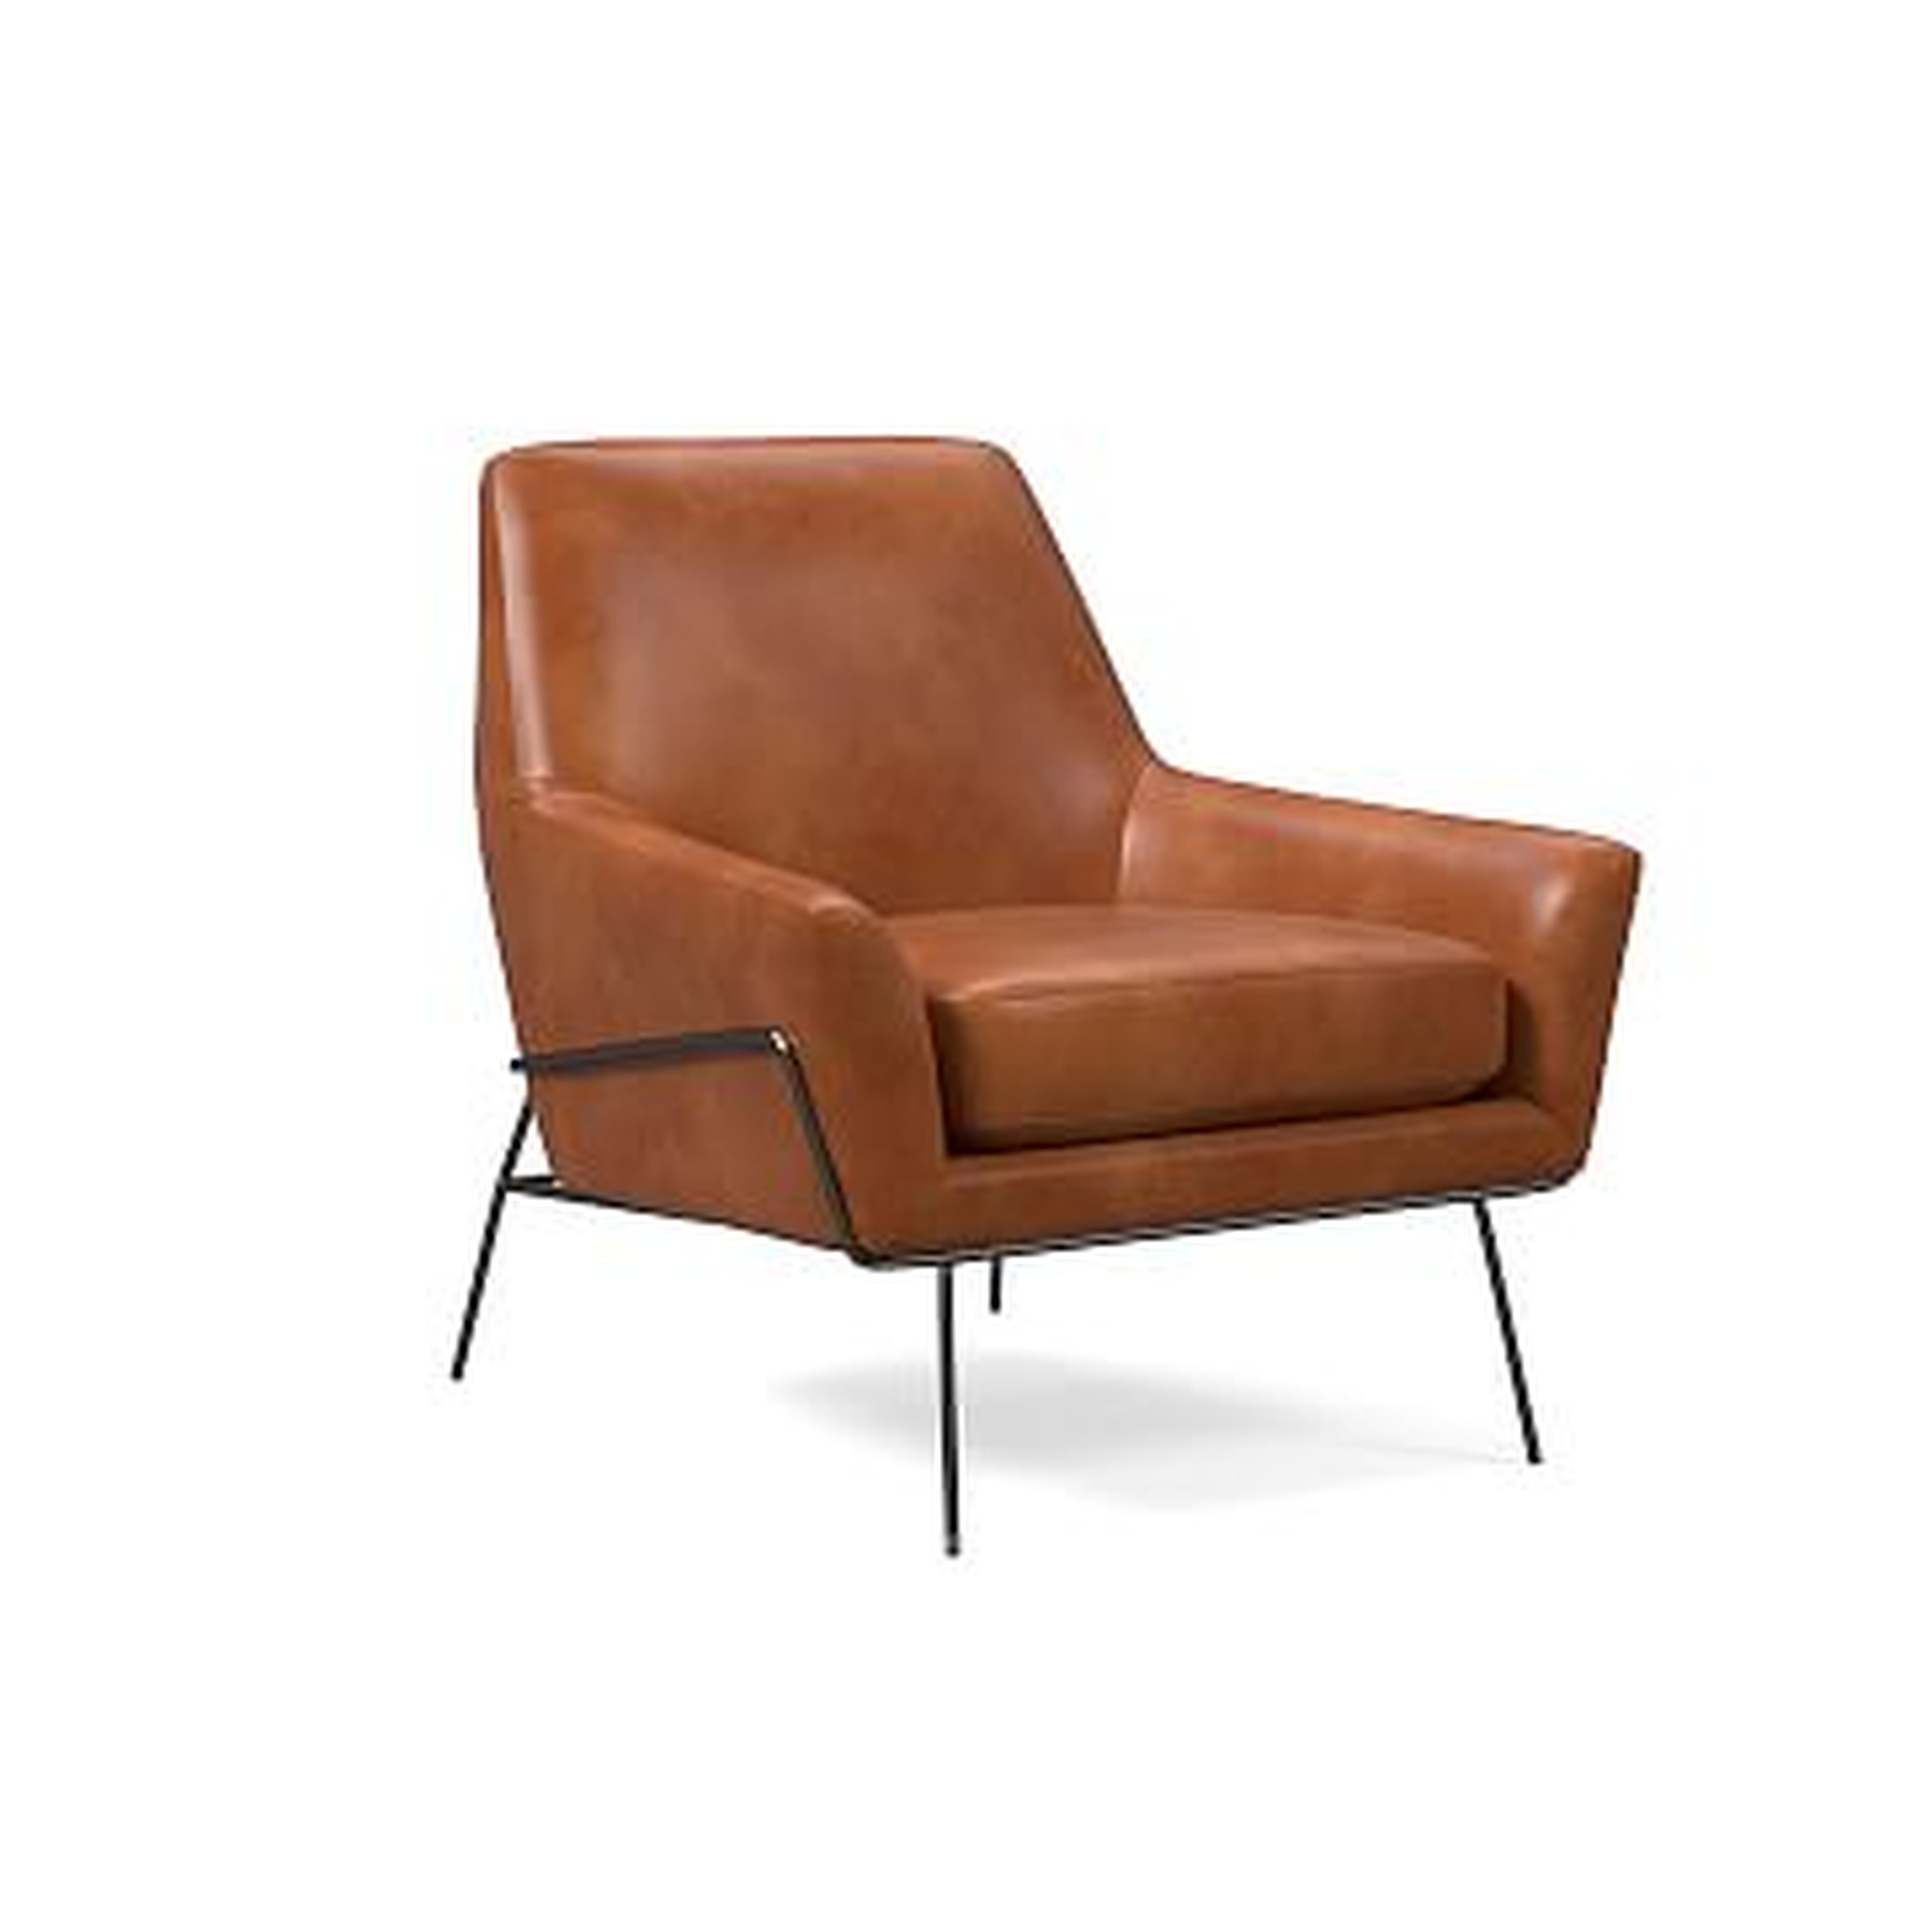 Lucas Wire Base Leather Chair, Poly, Vegan Leather, Saddle, Polished Nickel - West Elm